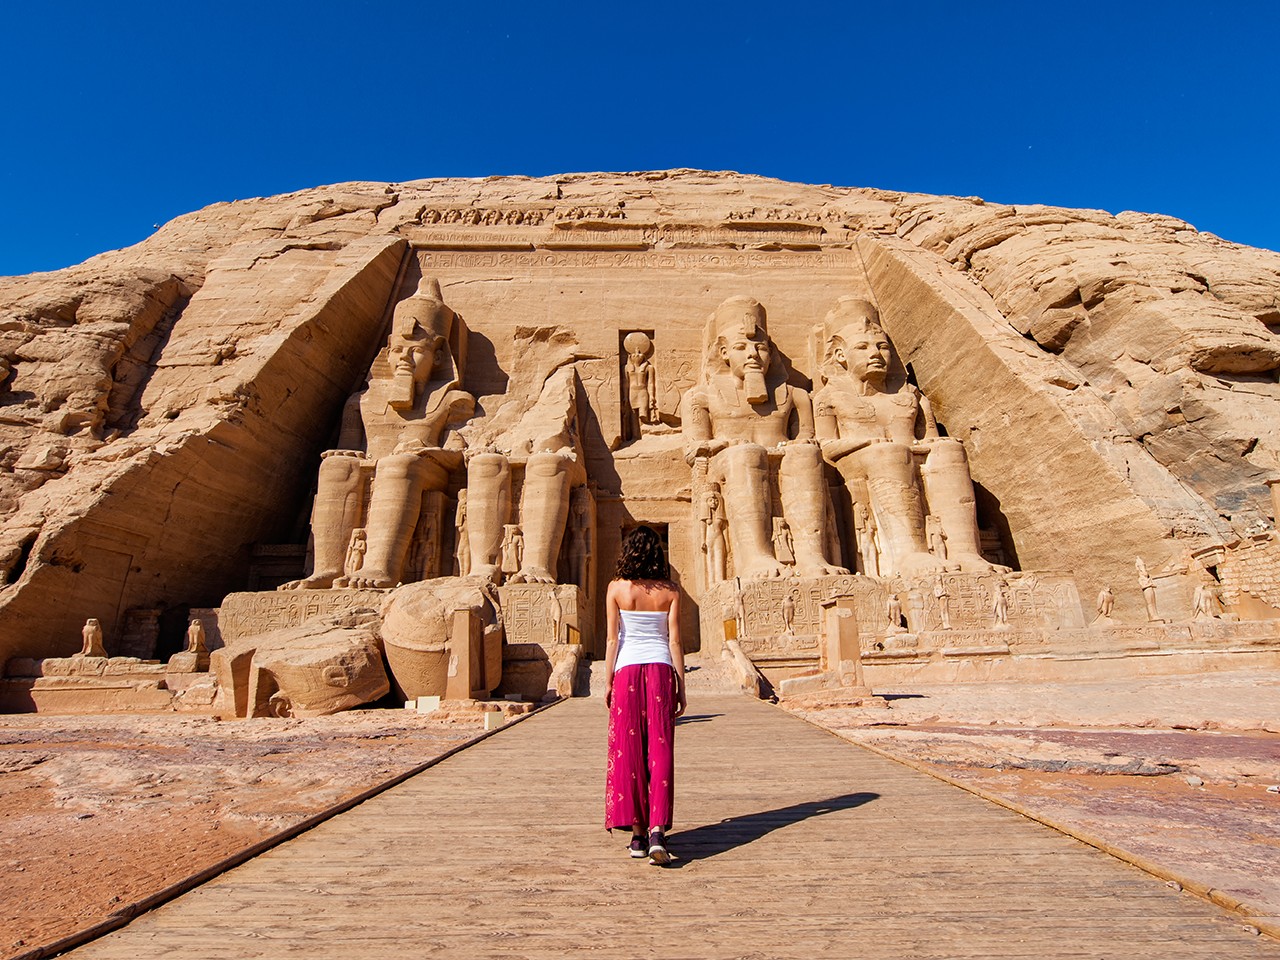 Cairo and Upper Egypt Overland 8 day tour